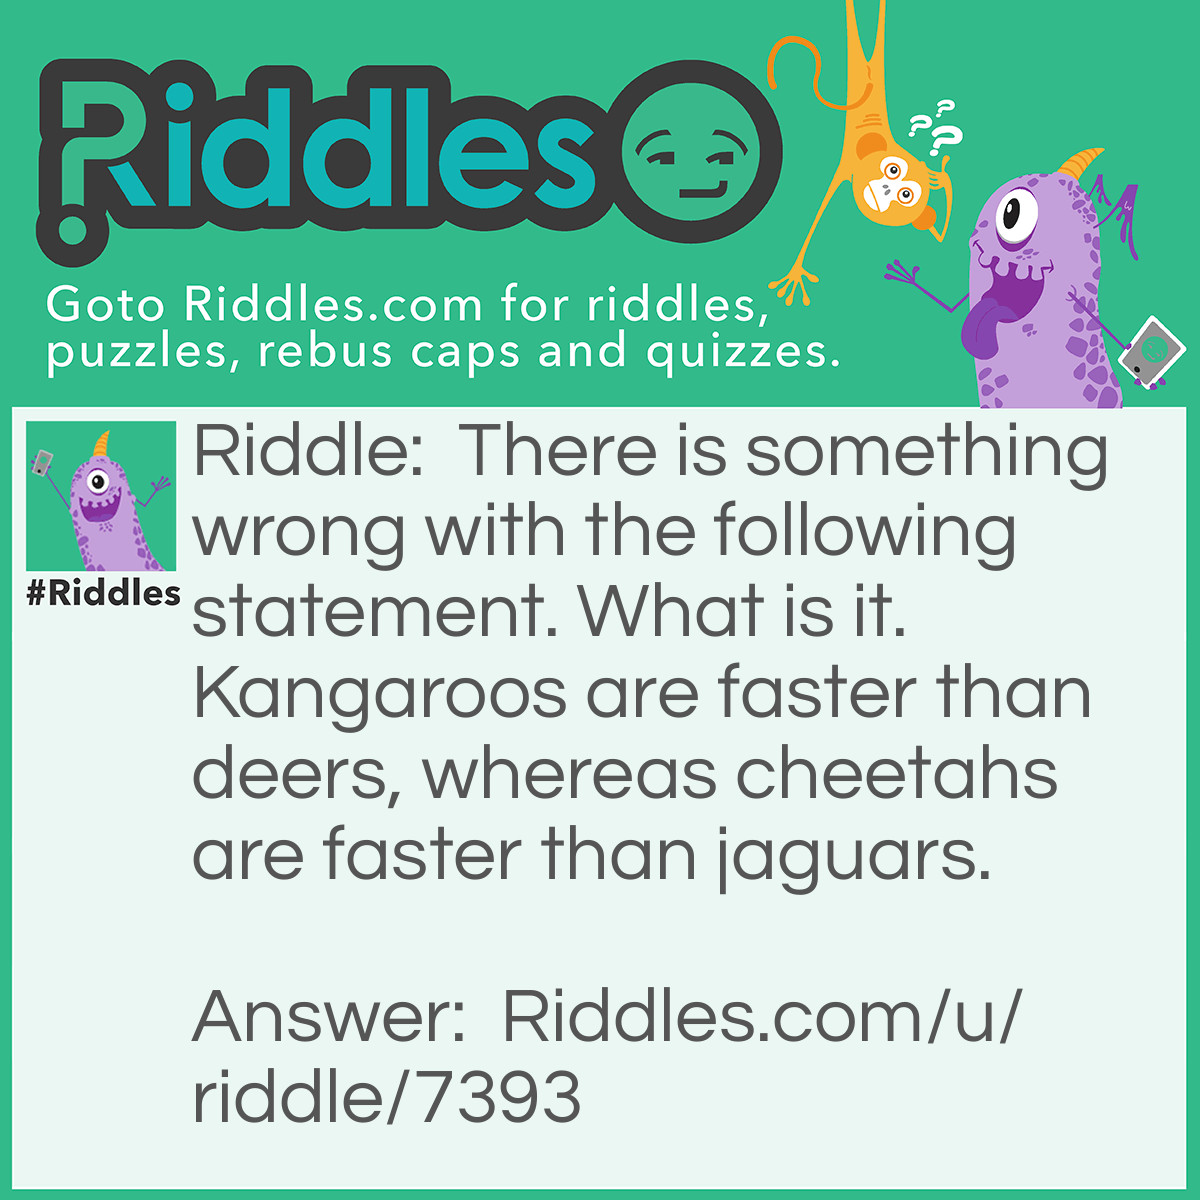 Riddle: There is something wrong with the following statement. What is it. Kangaroos are faster than deers, whereas cheetahs are faster than jaguars. Answer: 'What is it' should have a question mark and not a period.